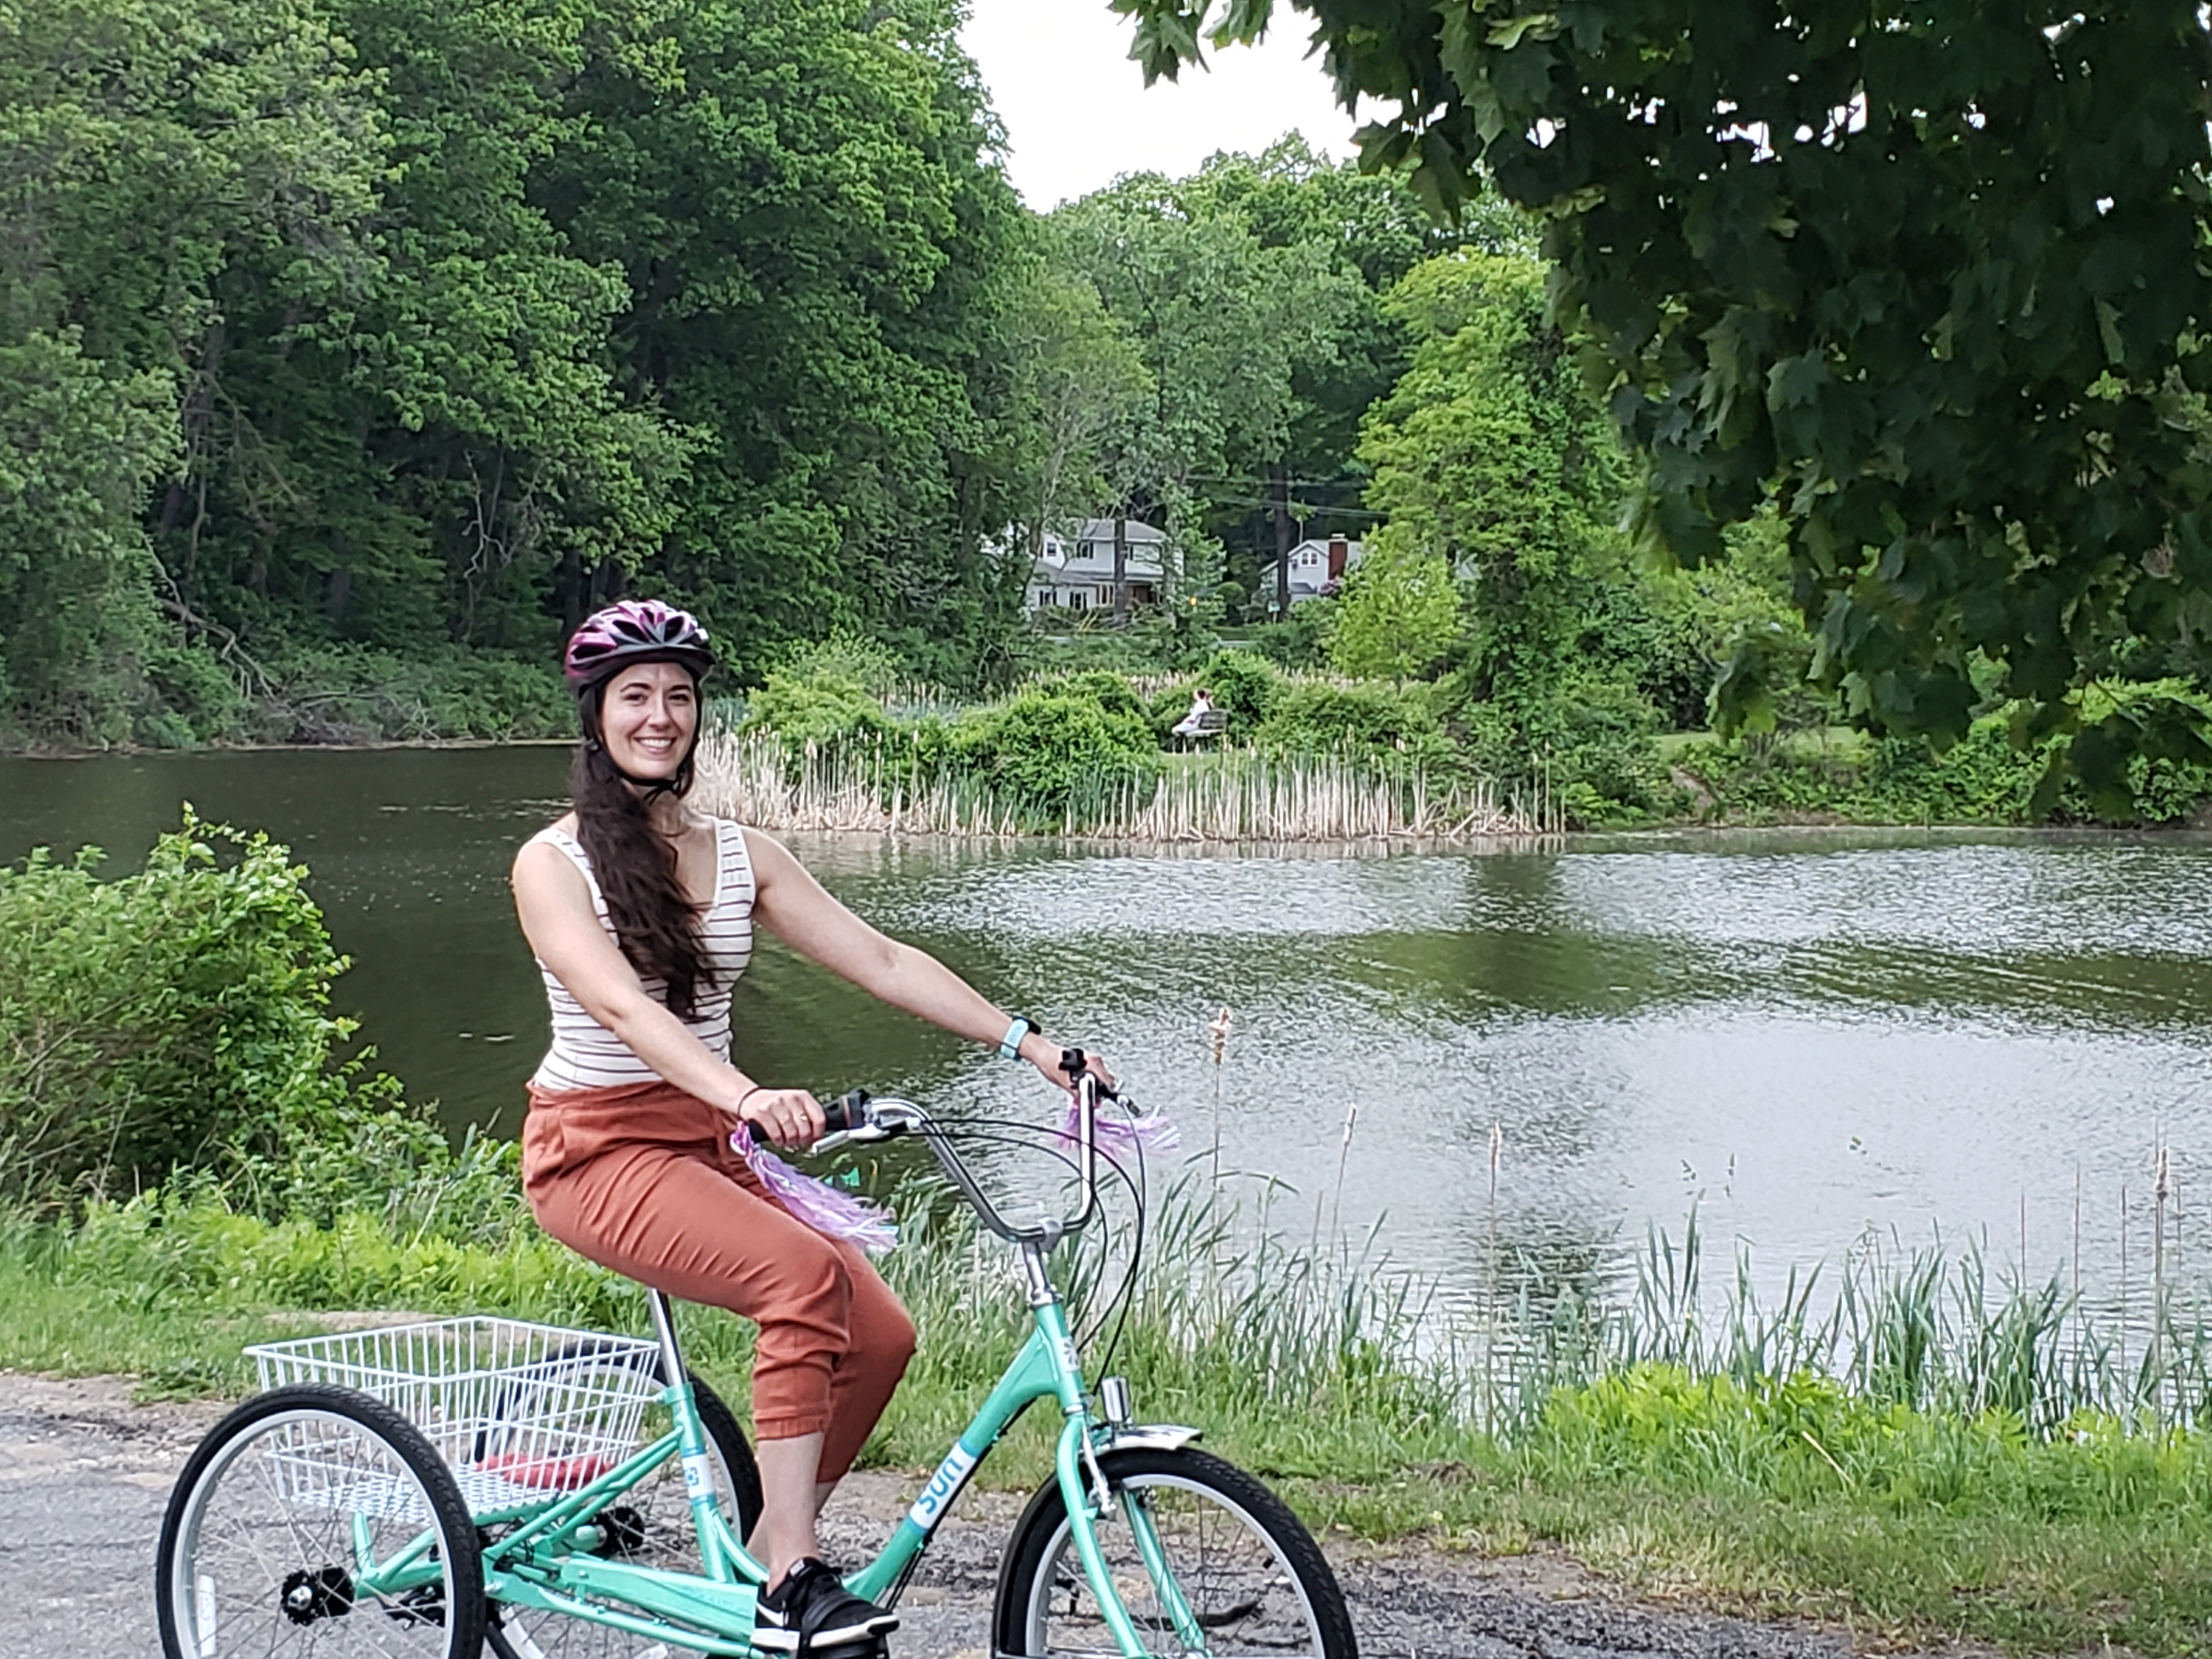 Kerry in copper colored pants and a white and red striped tank top, and a purple helmet, on her mint green tricycle, in front of a lake/pond surrounded by green trees.